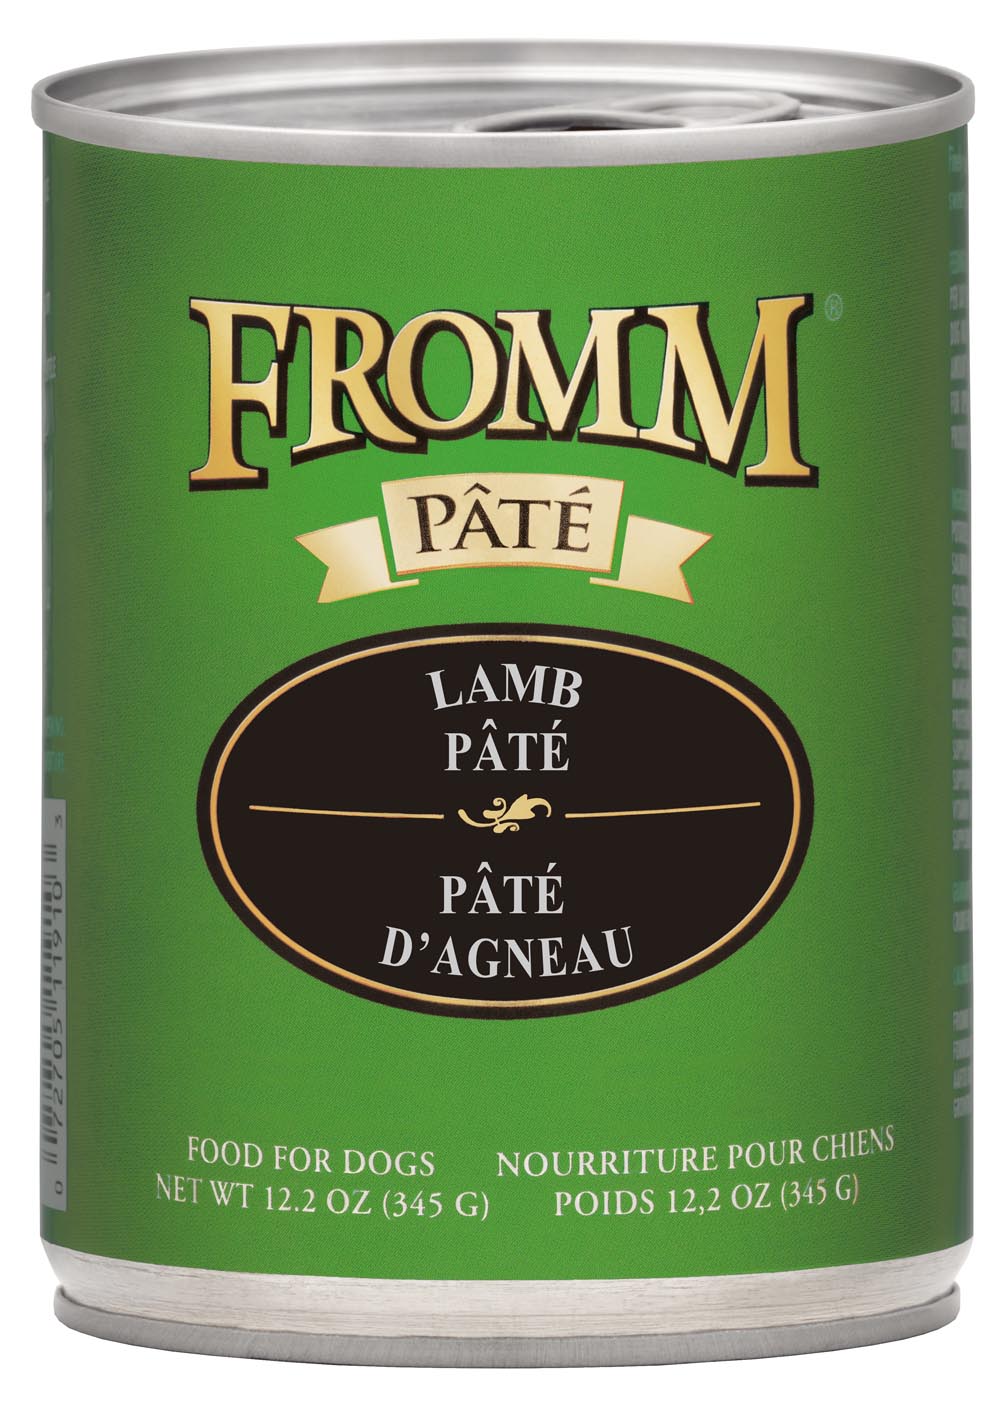 Fromm Lamb Pate Food for Dogs, 12.2 OZ